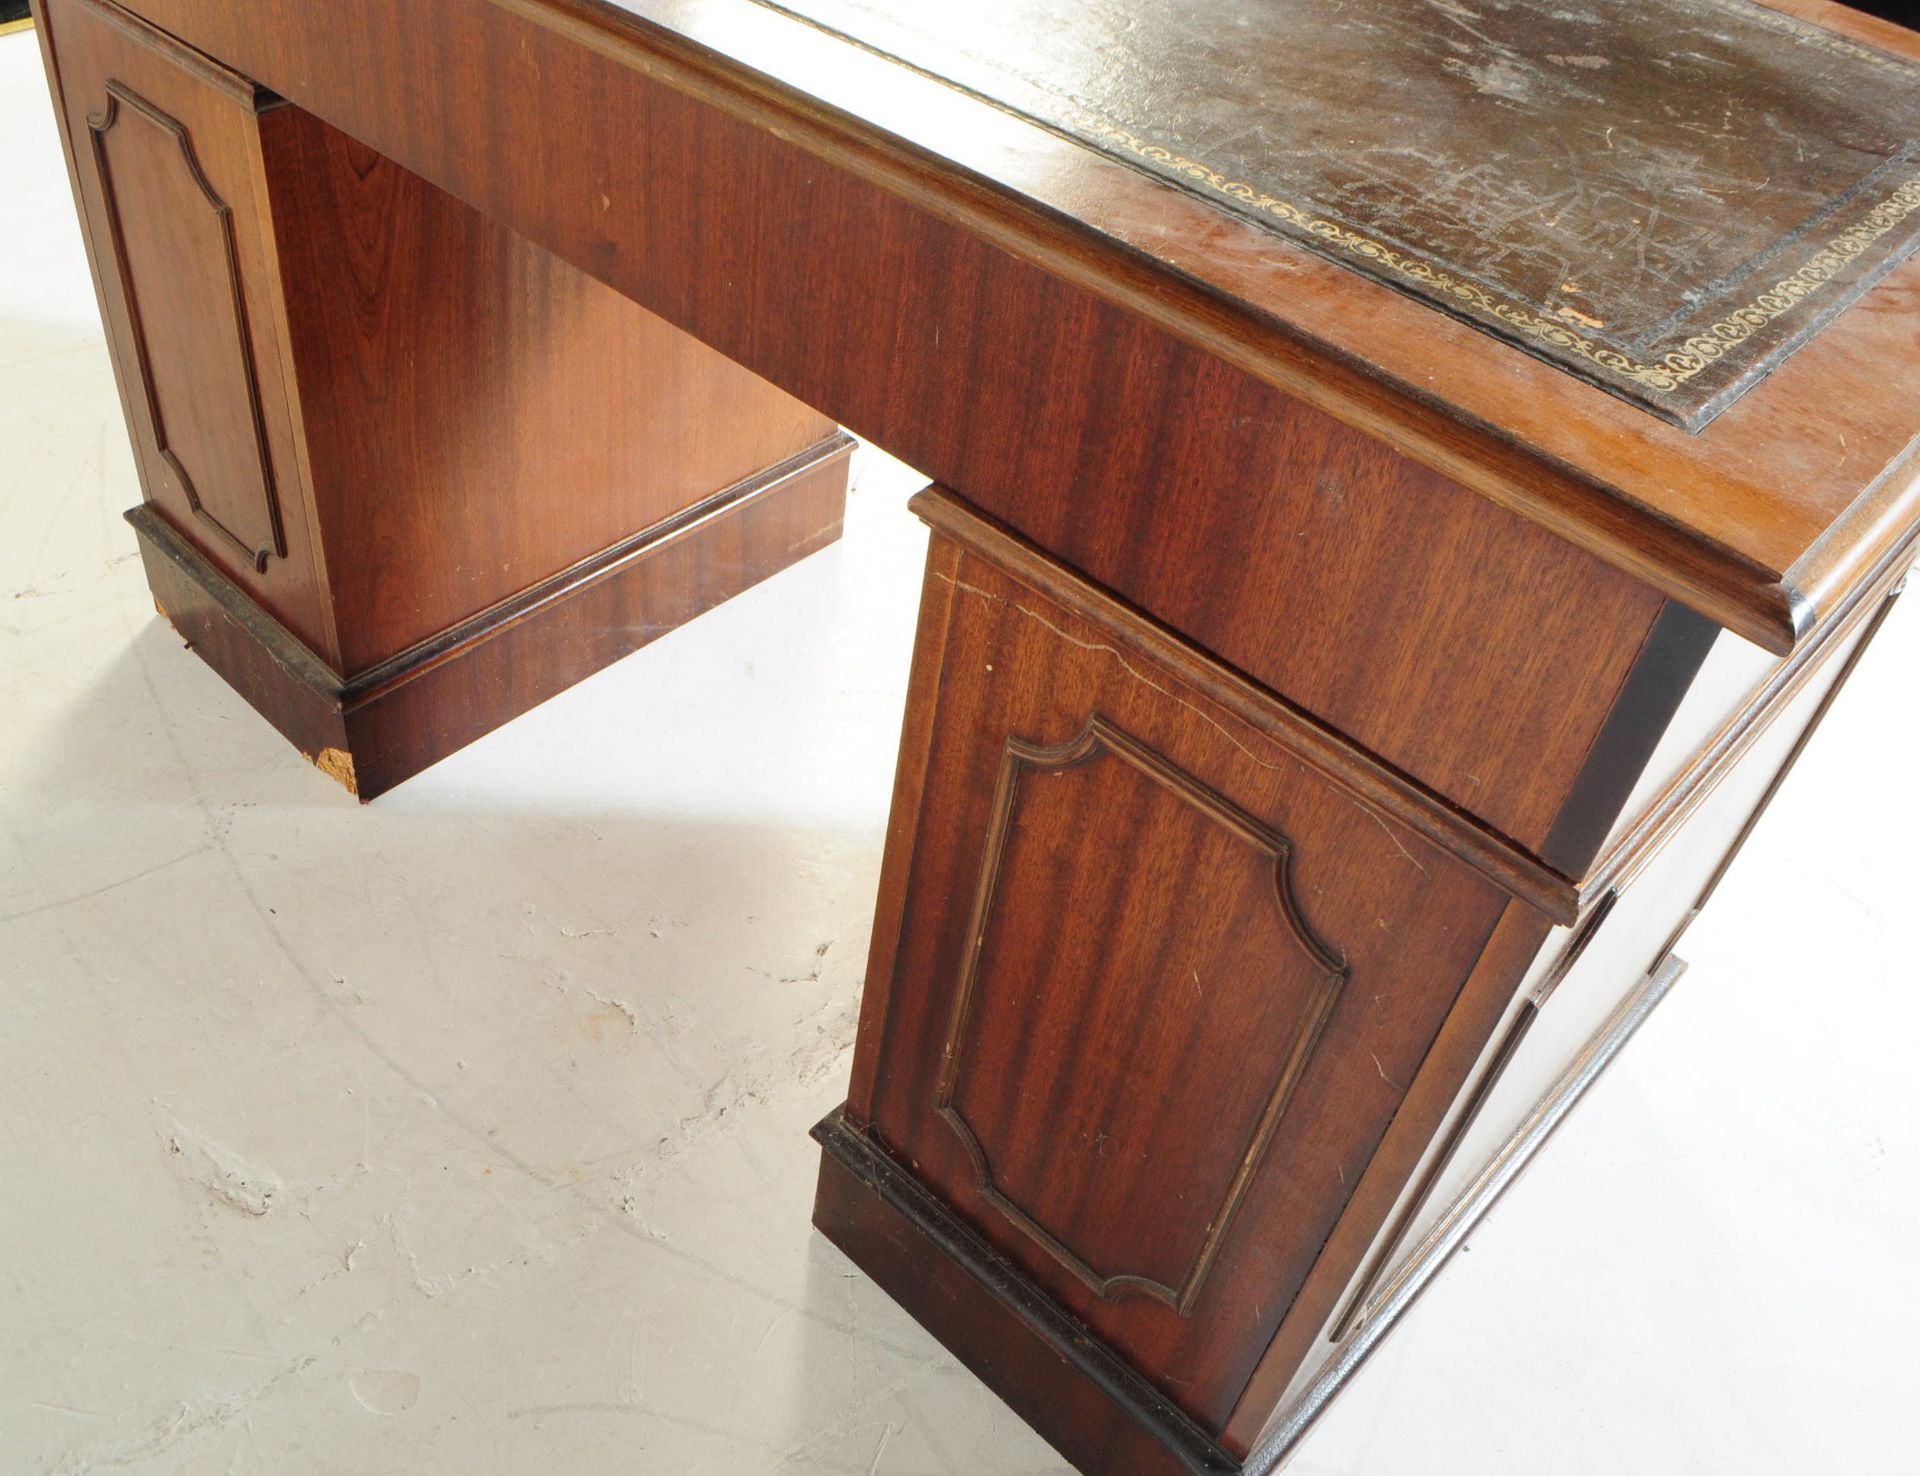 GEORGE III REVIVAL REPRODUCTION MAHOGANY OFFICE DESK - Image 7 of 8